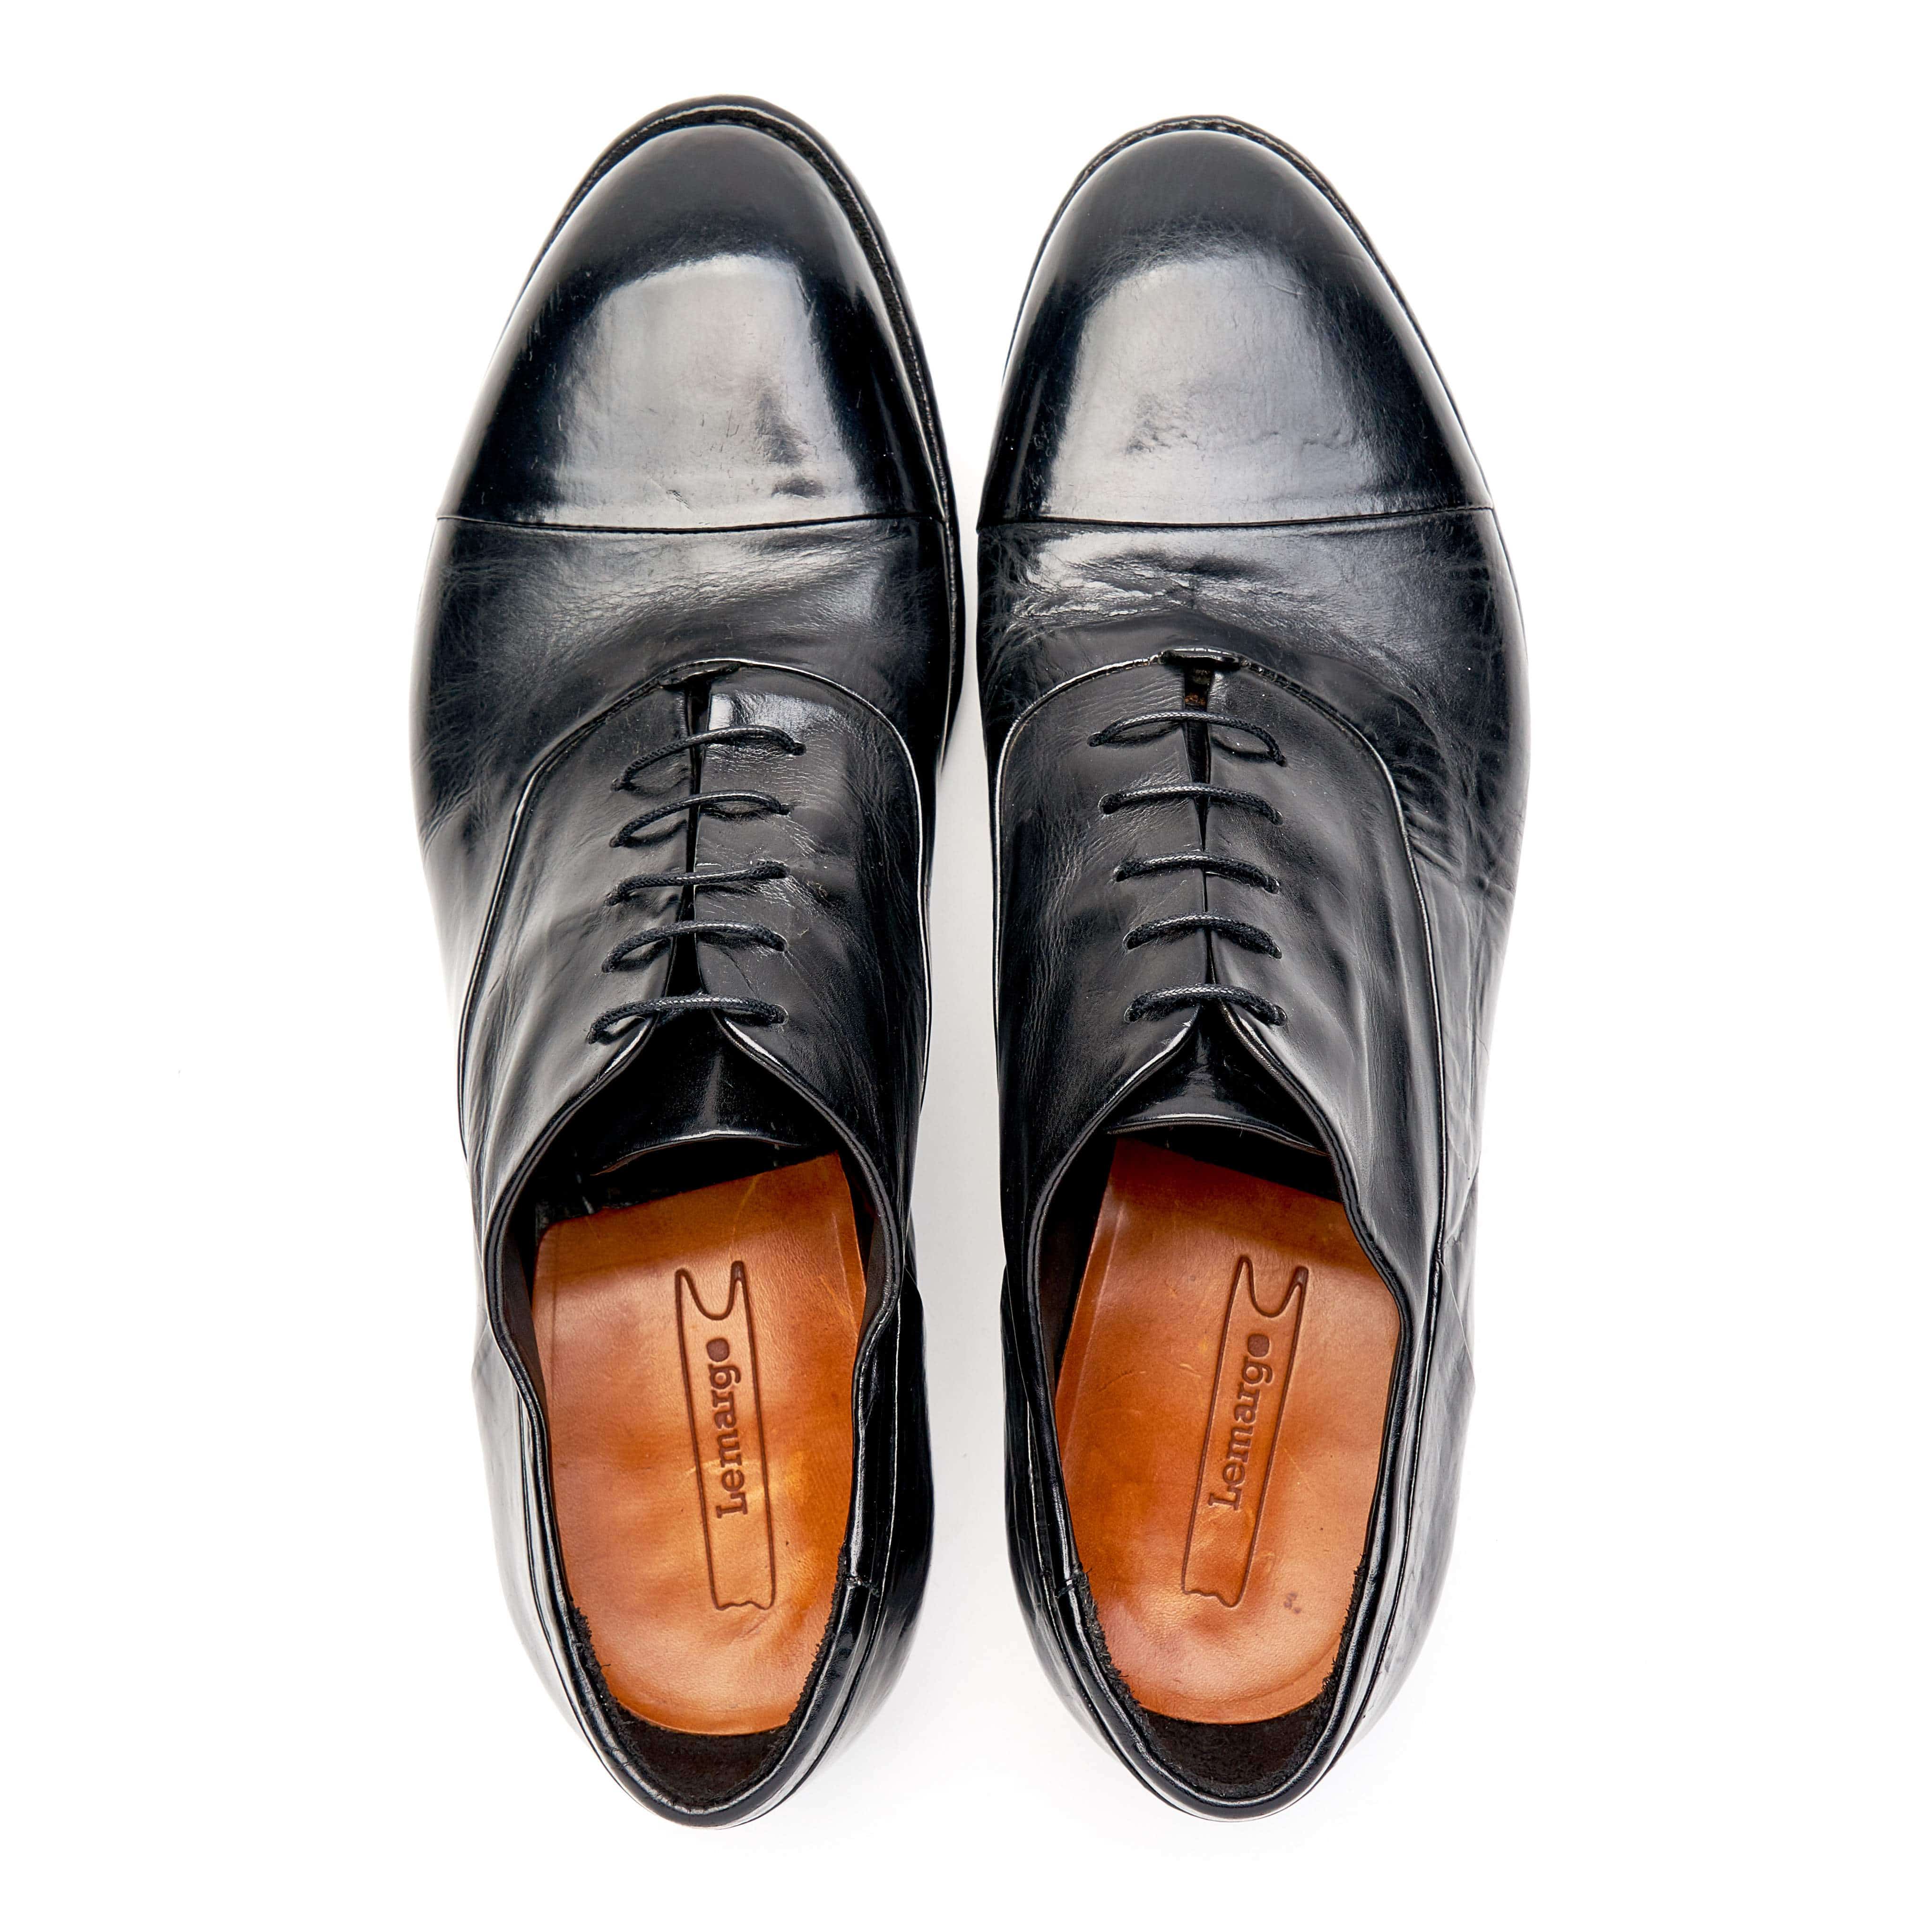 Lemargo AC10A Oxford - 124 Shoes